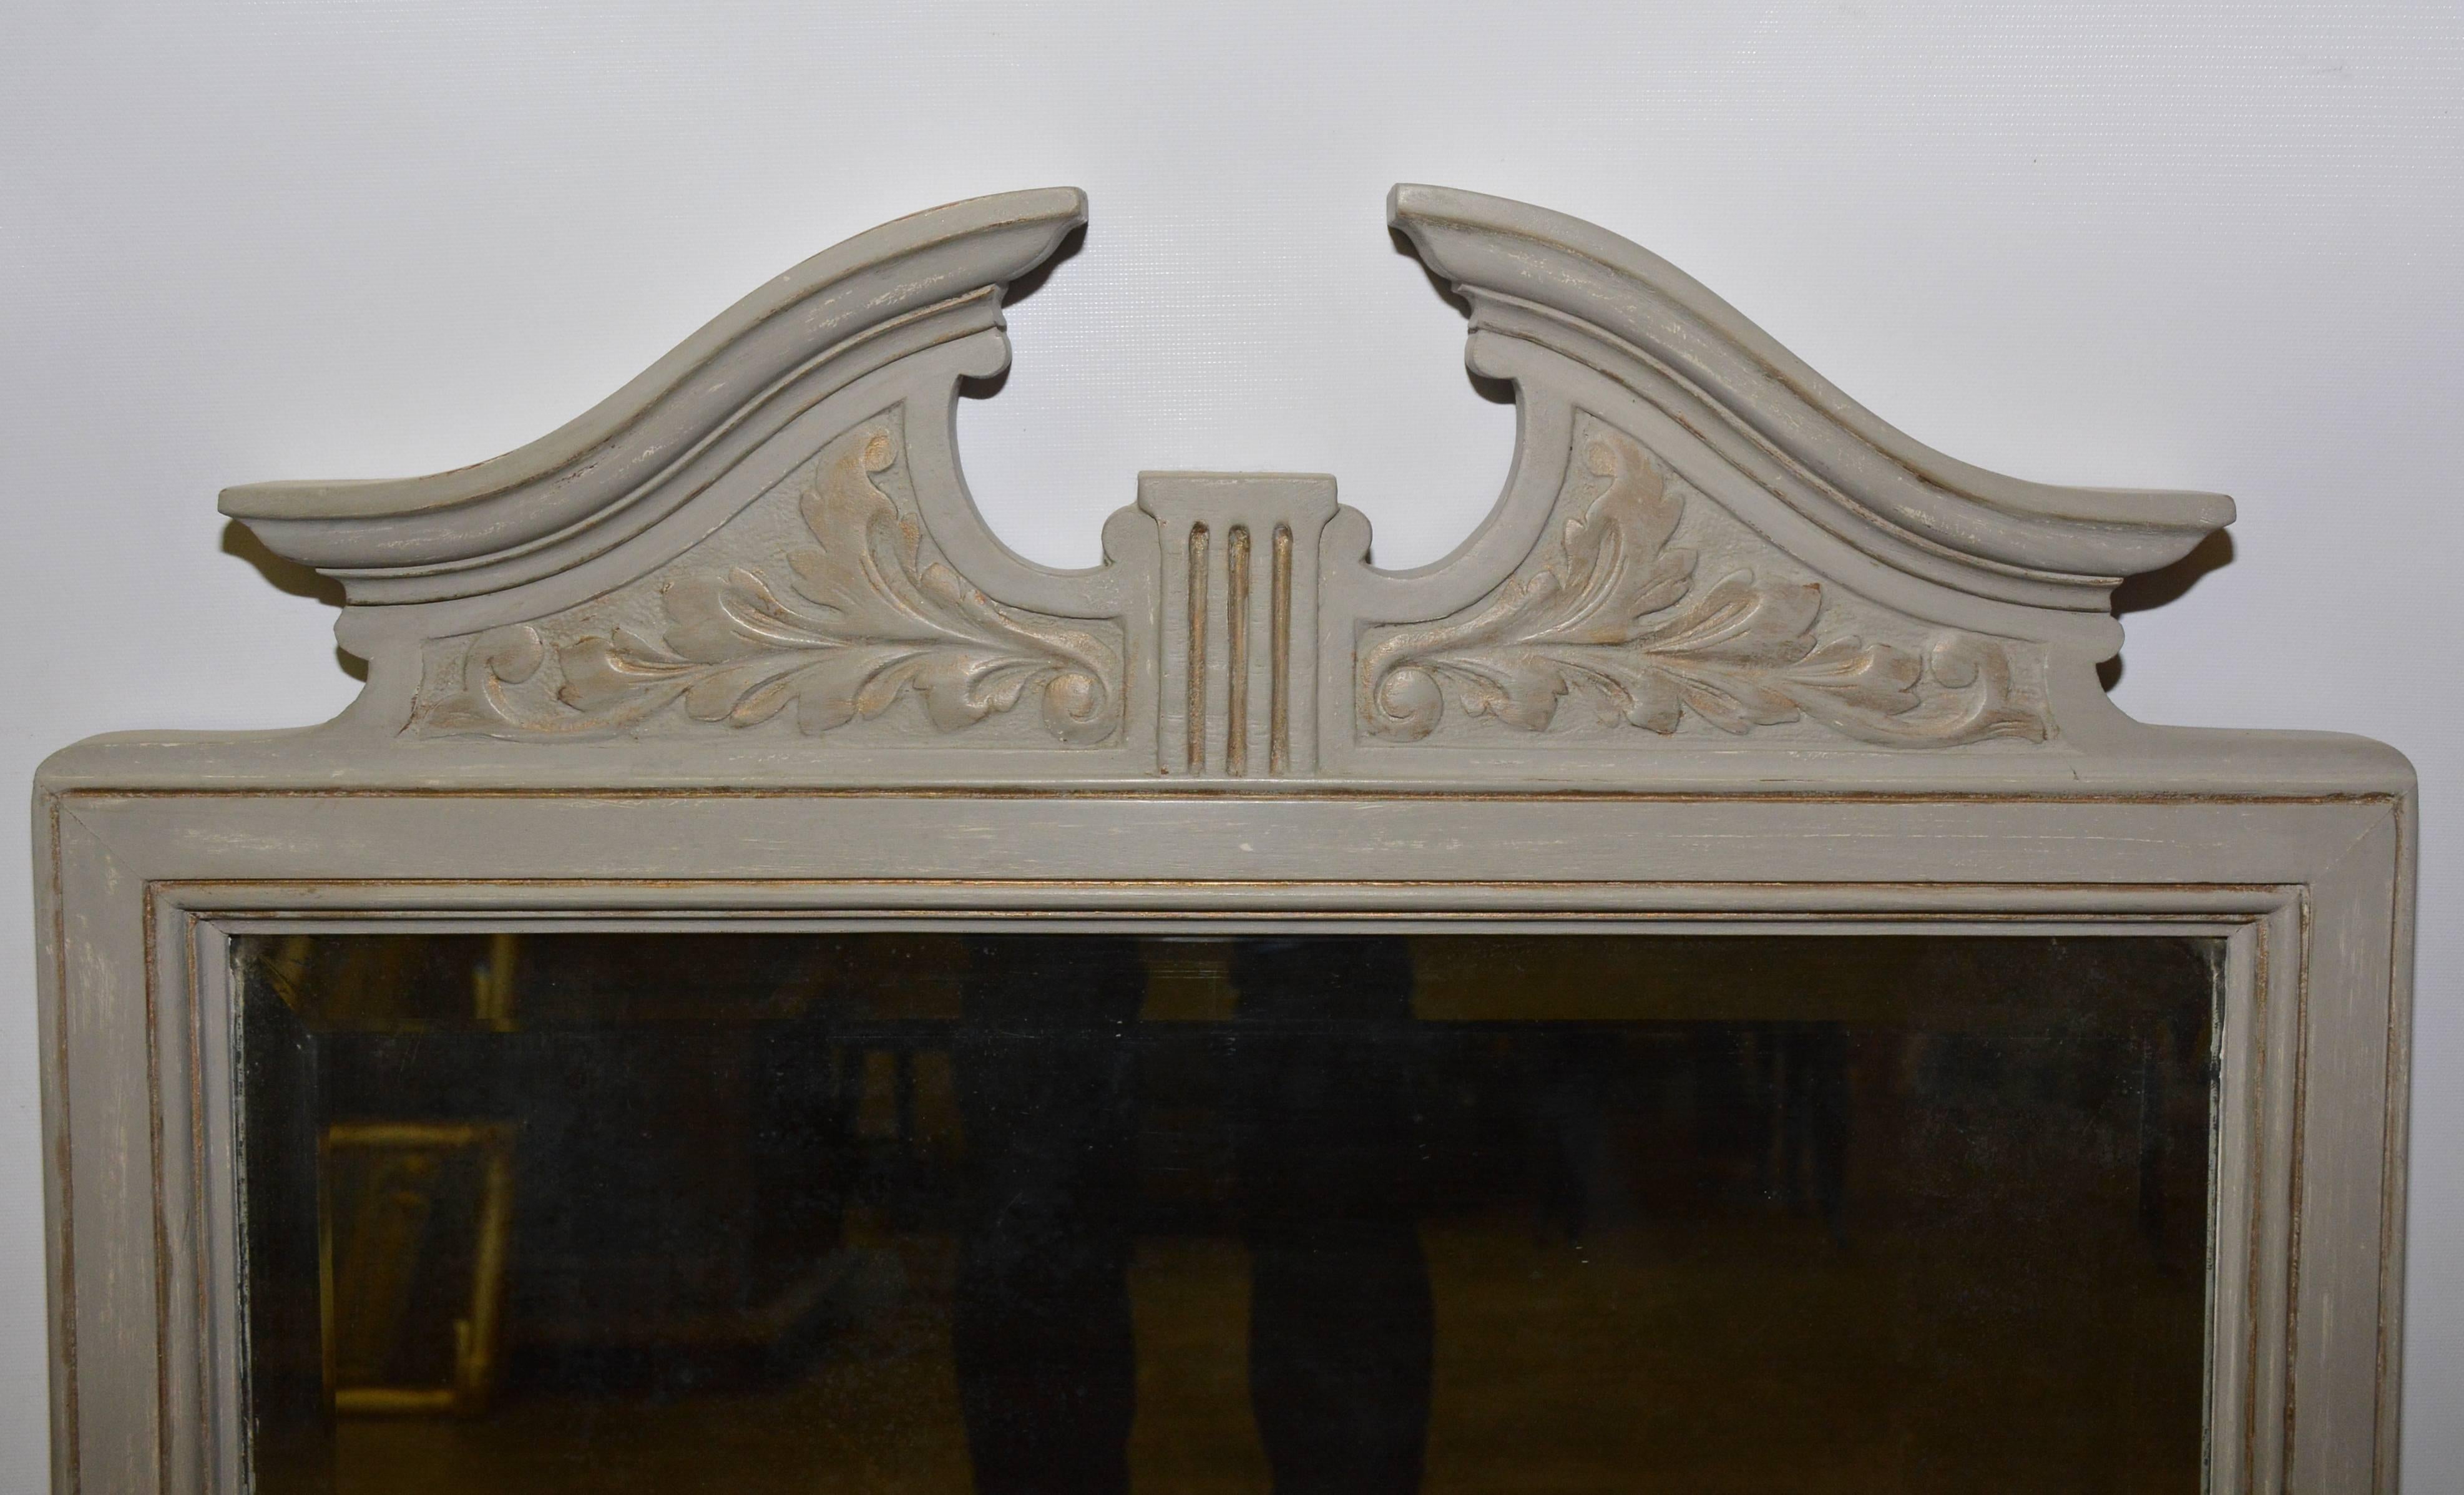 The square mirror frame is painted with a rubbed grey color and has a broken arch pediment decorated with leaves an relief. The silvered mirror is bevelled. The backing is wood and is wired for hanging. 
Use it for a fireplace mantel mirror, console